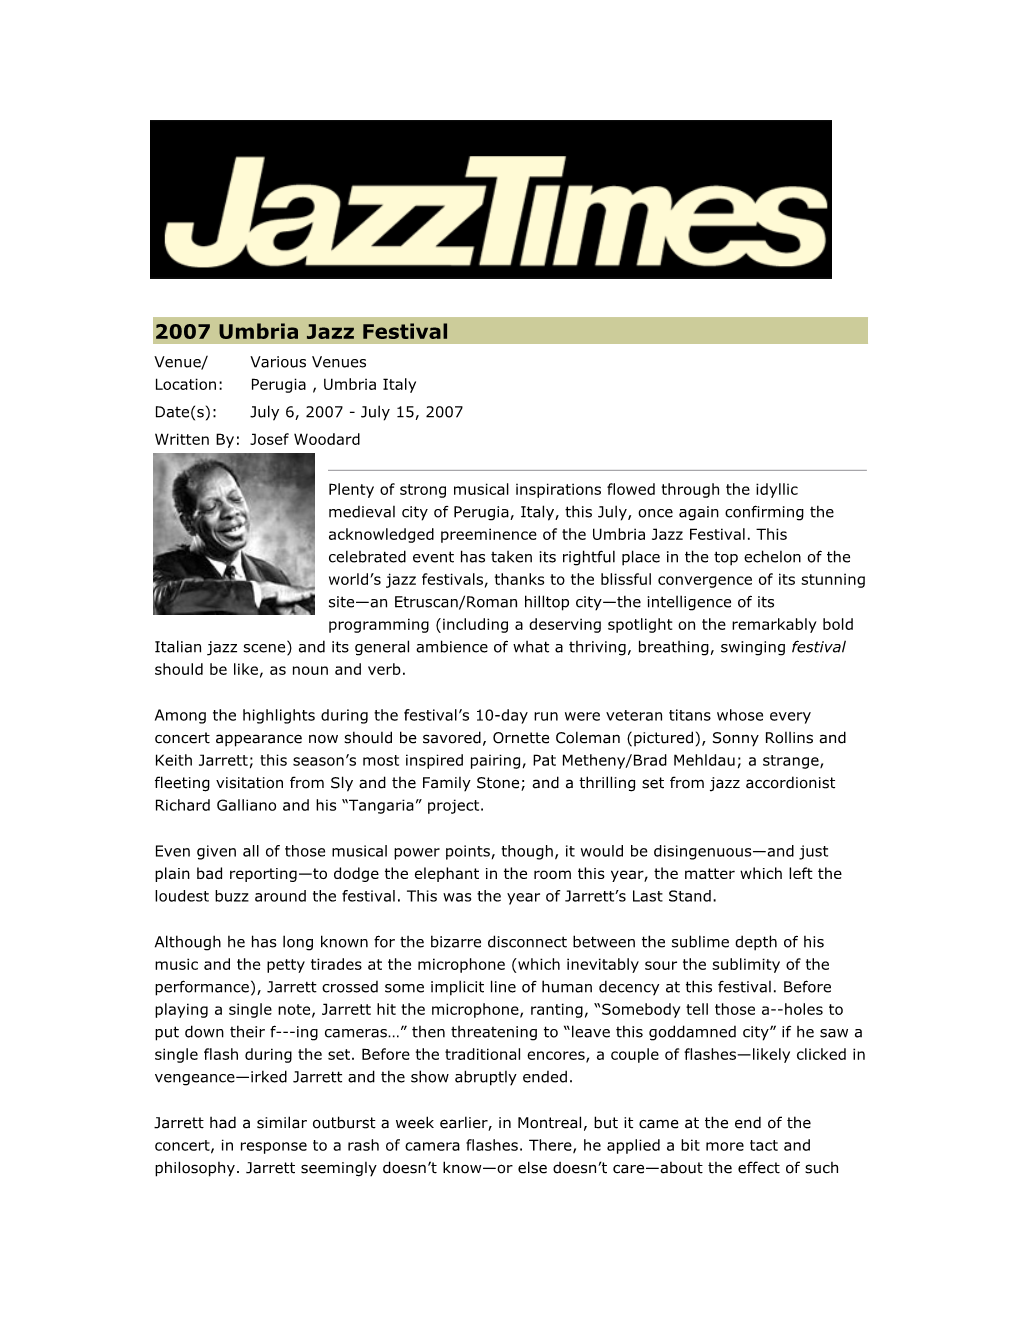 2007 Umbria Jazz Festival Venue/ Various Venues Location: Perugia , Umbria Italy Date(S): July 6, 2007 - July 15, 2007 Written By: Josef Woodard